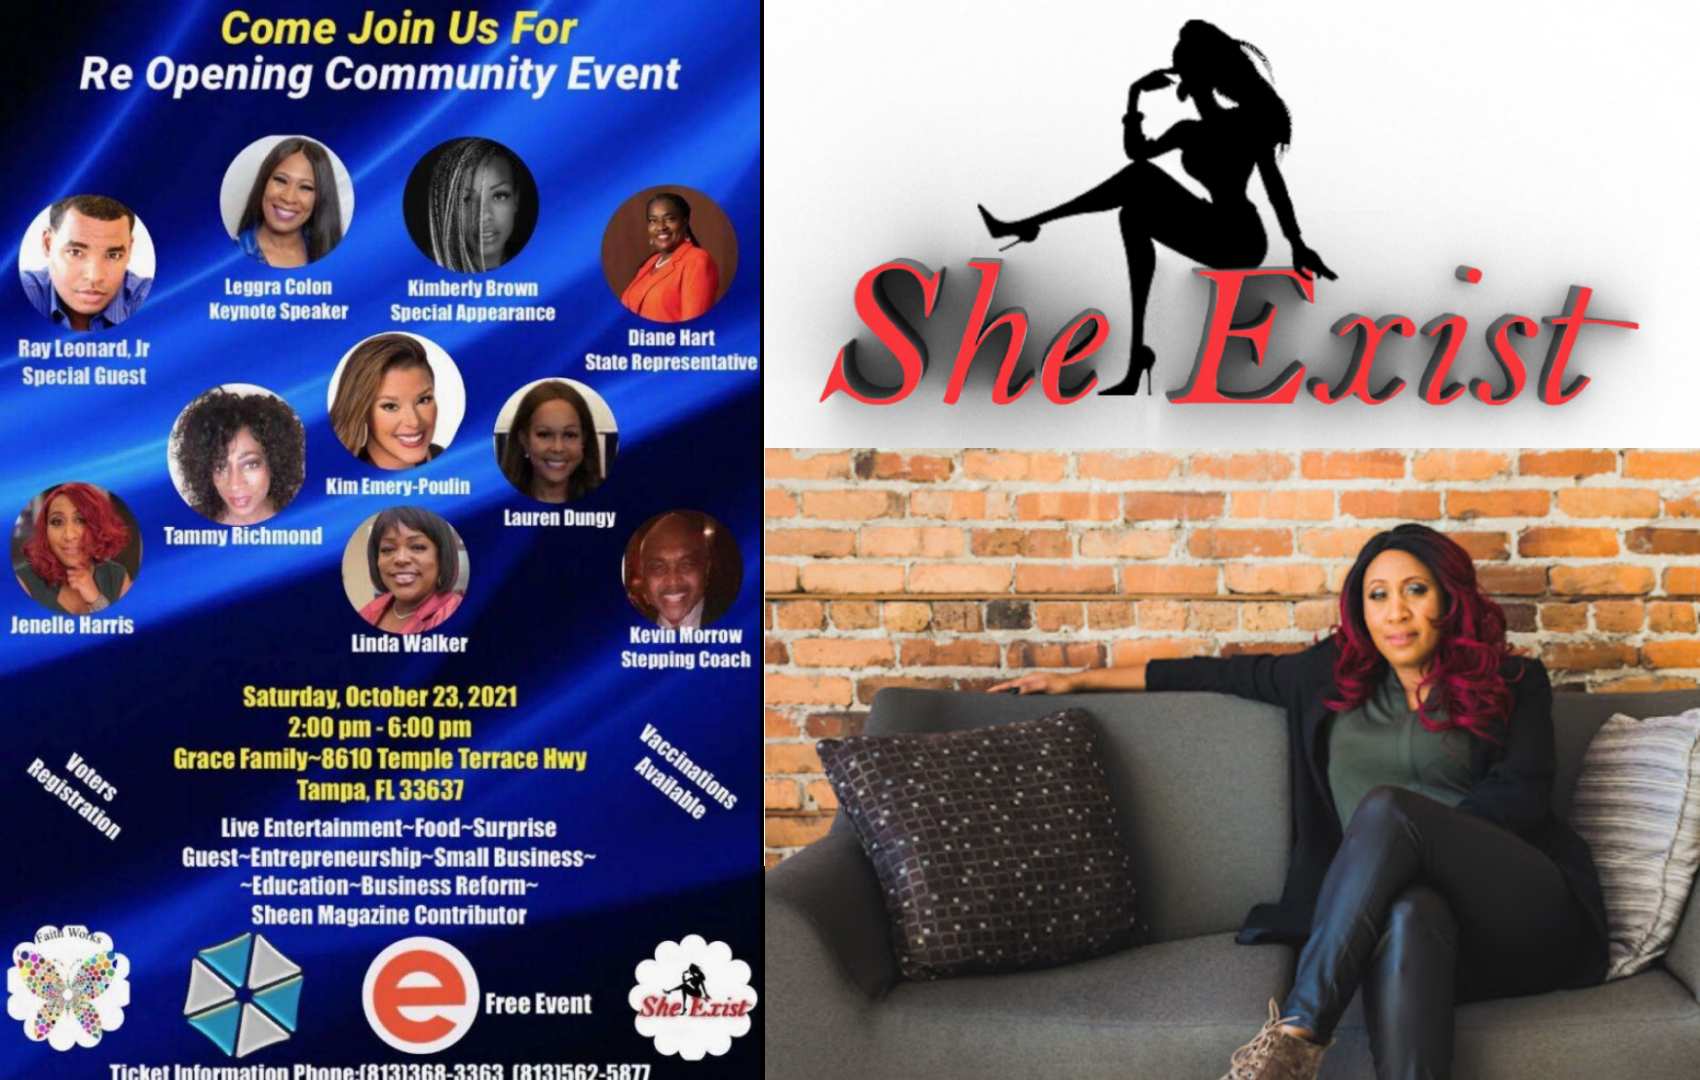 Exclusive: Red Carpet Event Hosted By CEO Janelle Harris of SHE EXIST & CEO Linda Walker of FAITHWORKS EMPOWERMENT !